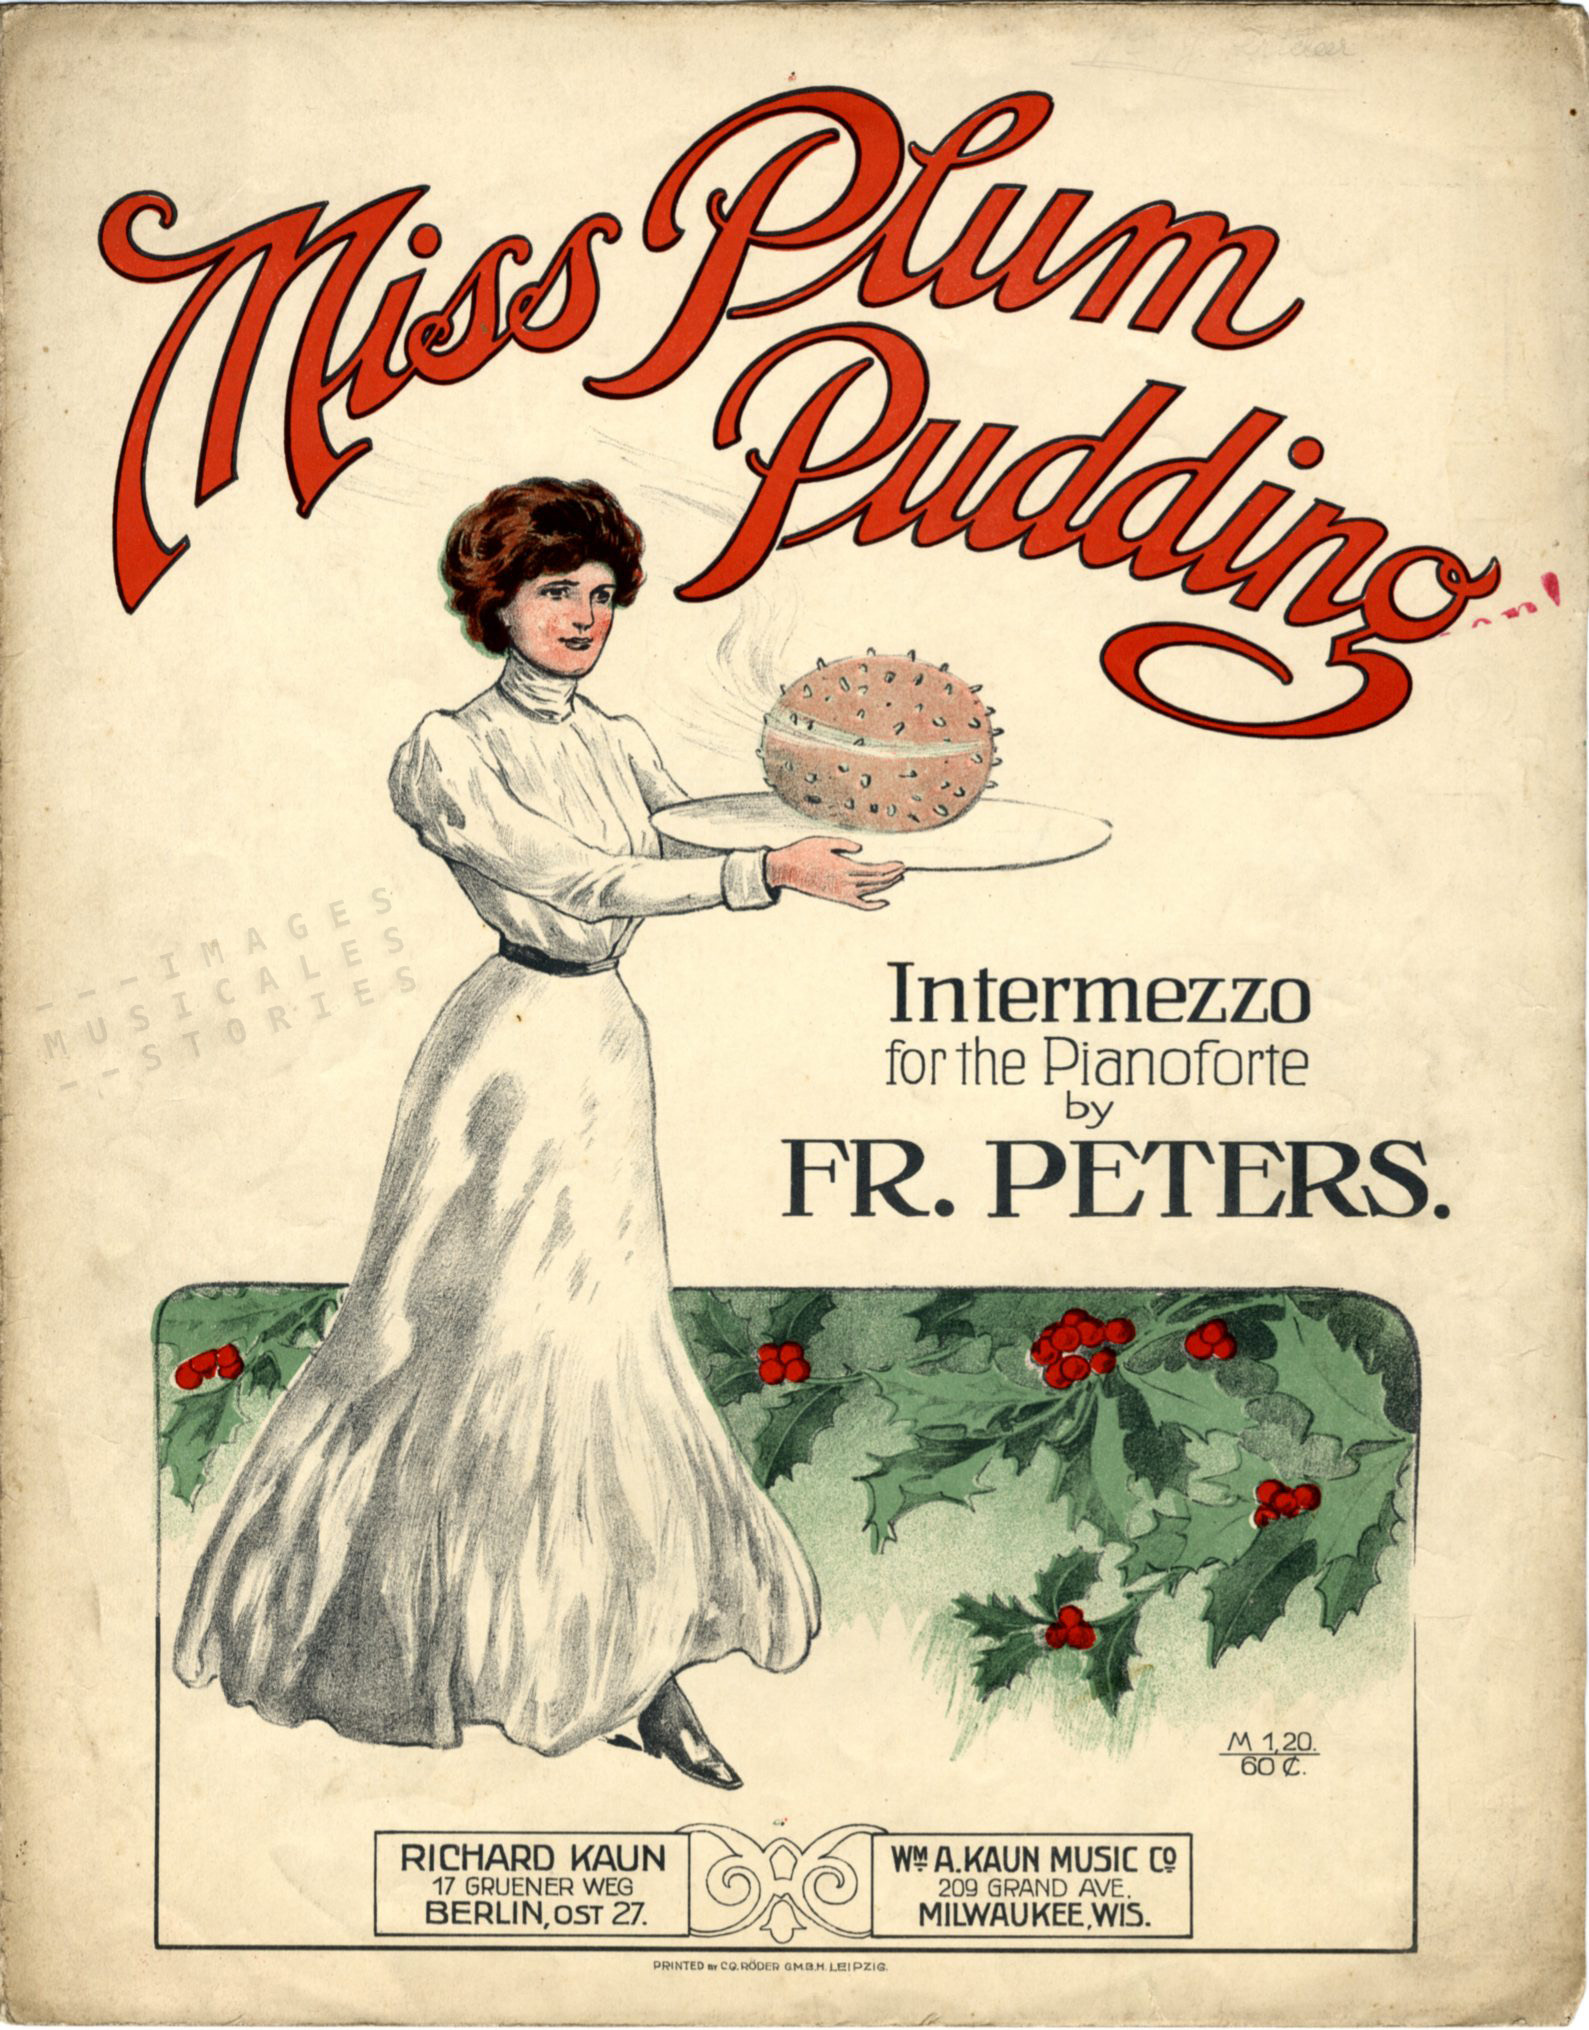 'Miss Plum Pudding' piano intermezzo by Fr. Peters